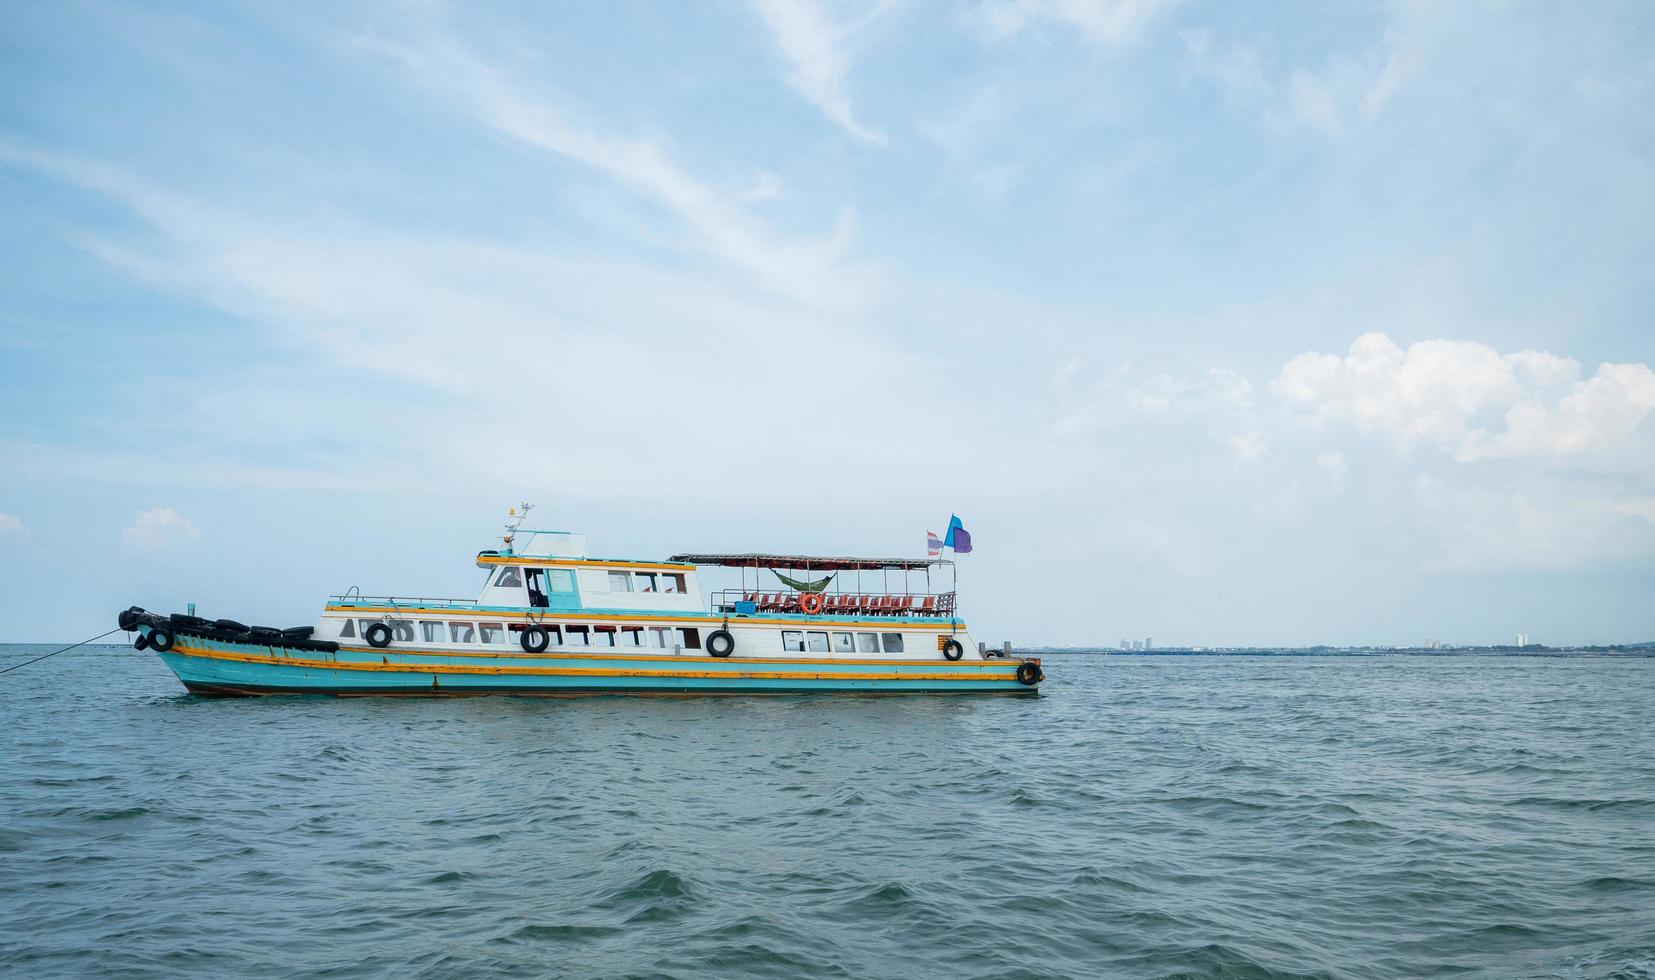 Tourism ship on the ocean and blue sky landscape,Travel boat concept for transport traveler in Thailand with beautiful sea and sky photo